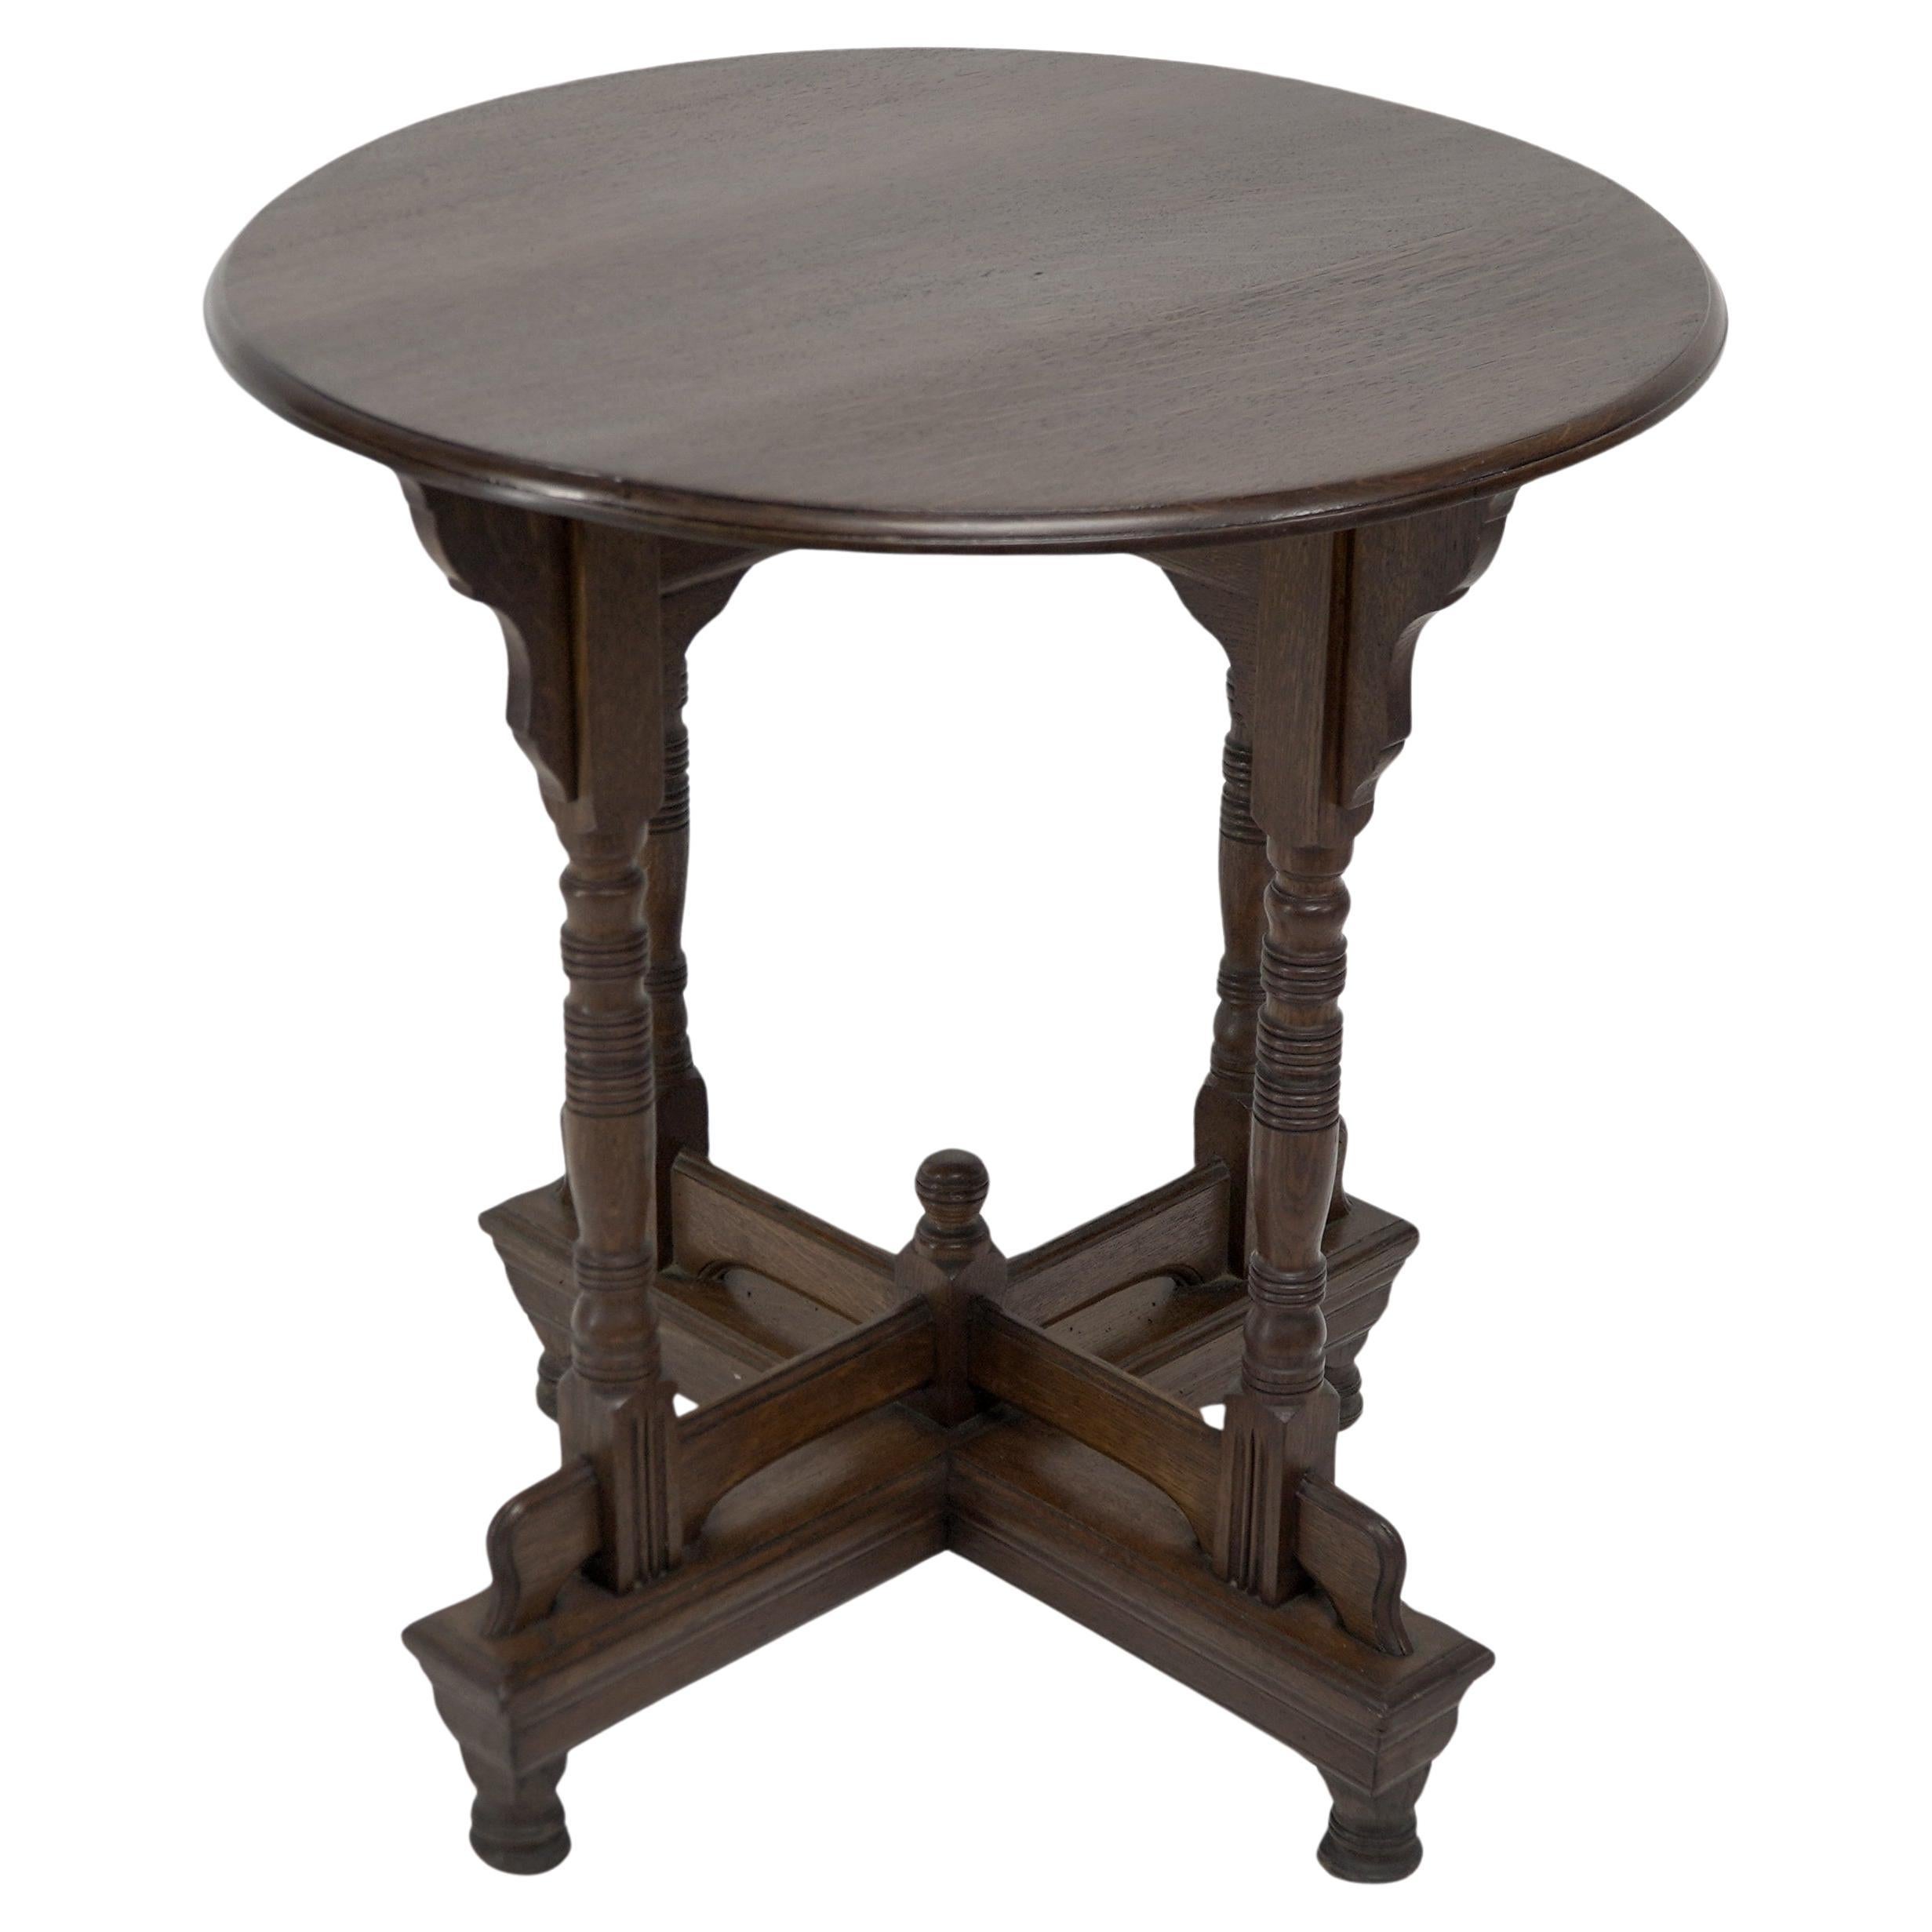 Alfred Waterhouse. A Gothic Revival oak side table with double cross stretchers. For Sale